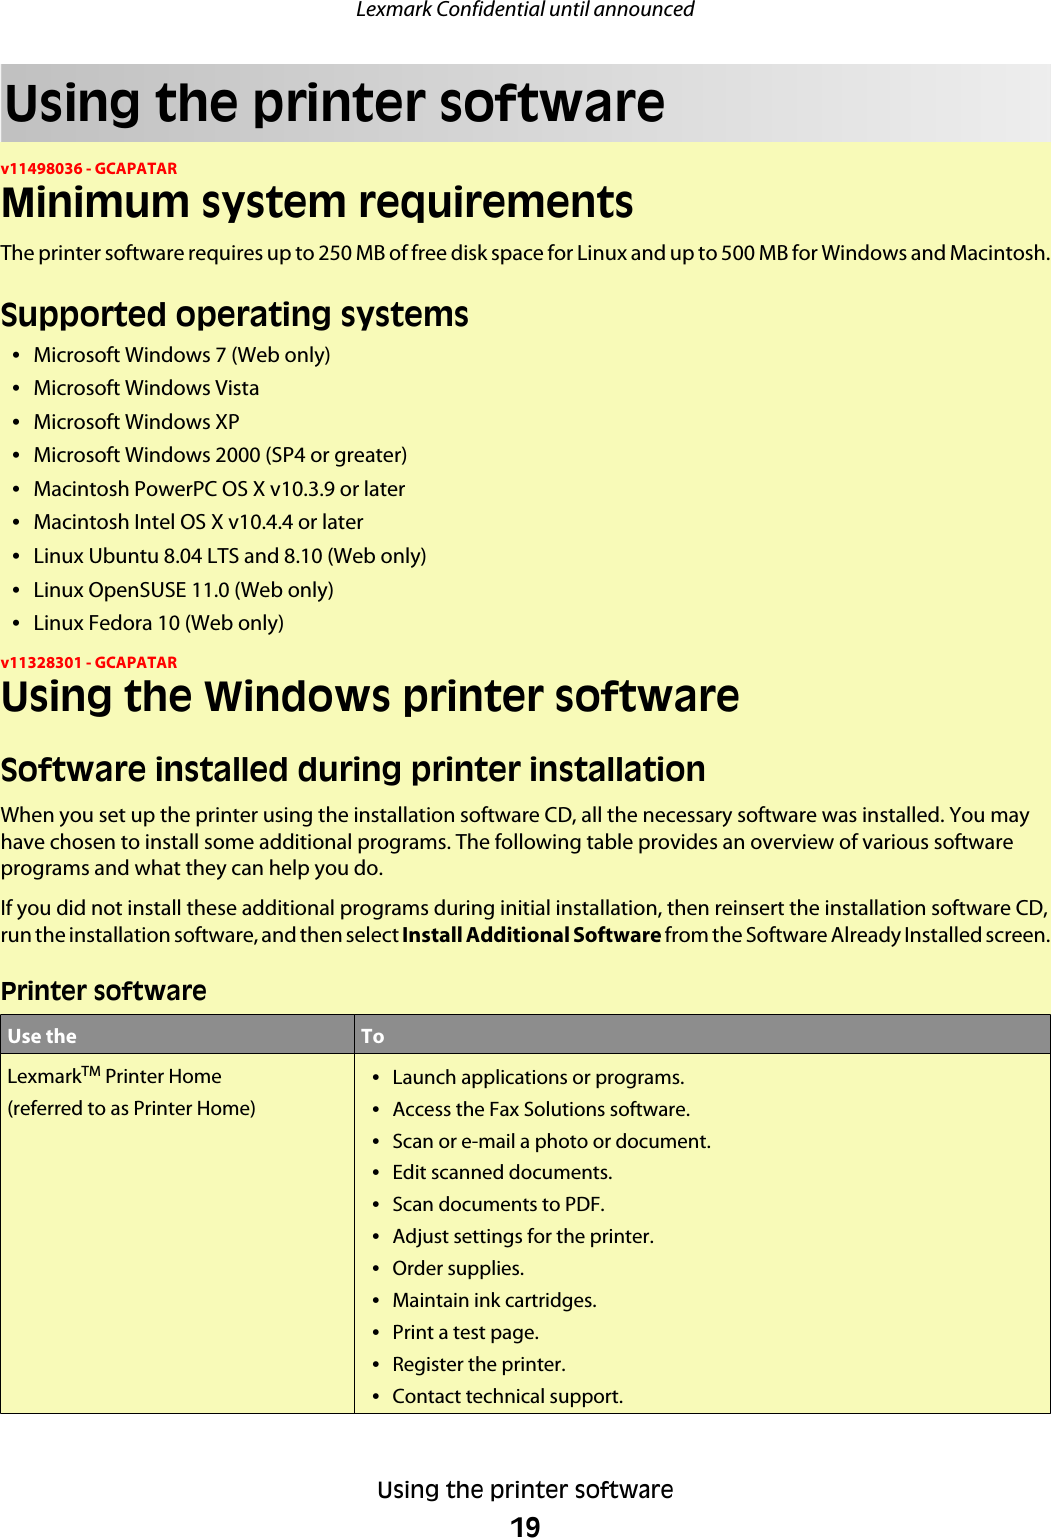 Using the printer softwarev11498036 - GCAPATARMinimum system requirementsThe printer software requires up to 250 MB of free disk space for Linux and up to 500 MB for Windows and Macintosh.Supported operating systems•Microsoft Windows 7 (Web only)•Microsoft Windows Vista•Microsoft Windows XP•Microsoft Windows 2000 (SP4 or greater)•Macintosh PowerPC OS X v10.3.9 or later•Macintosh Intel OS X v10.4.4 or later•Linux Ubuntu 8.04 LTS and 8.10 (Web only)•Linux OpenSUSE 11.0 (Web only)•Linux Fedora 10 (Web only)v11328301 - GCAPATARUsing the Windows printer softwareSoftware installed during printer installationWhen you set up the printer using the installation software CD, all the necessary software was installed. You mayhave chosen to install some additional programs. The following table provides an overview of various softwareprograms and what they can help you do.If you did not install these additional programs during initial installation, then reinsert the installation software CD,run the installation software, and then select Install Additional Software from the Software Already Installed screen.Printer softwareUse the ToLexmarkTM Printer Home(referred to as Printer Home)•Launch applications or programs.•Access the Fax Solutions software.•Scan or e-mail a photo or document.•Edit scanned documents.•Scan documents to PDF.•Adjust settings for the printer.•Order supplies.•Maintain ink cartridges.•Print a test page.•Register the printer.•Contact technical support.Lexmark Confidential until announcedUsing the printer software19